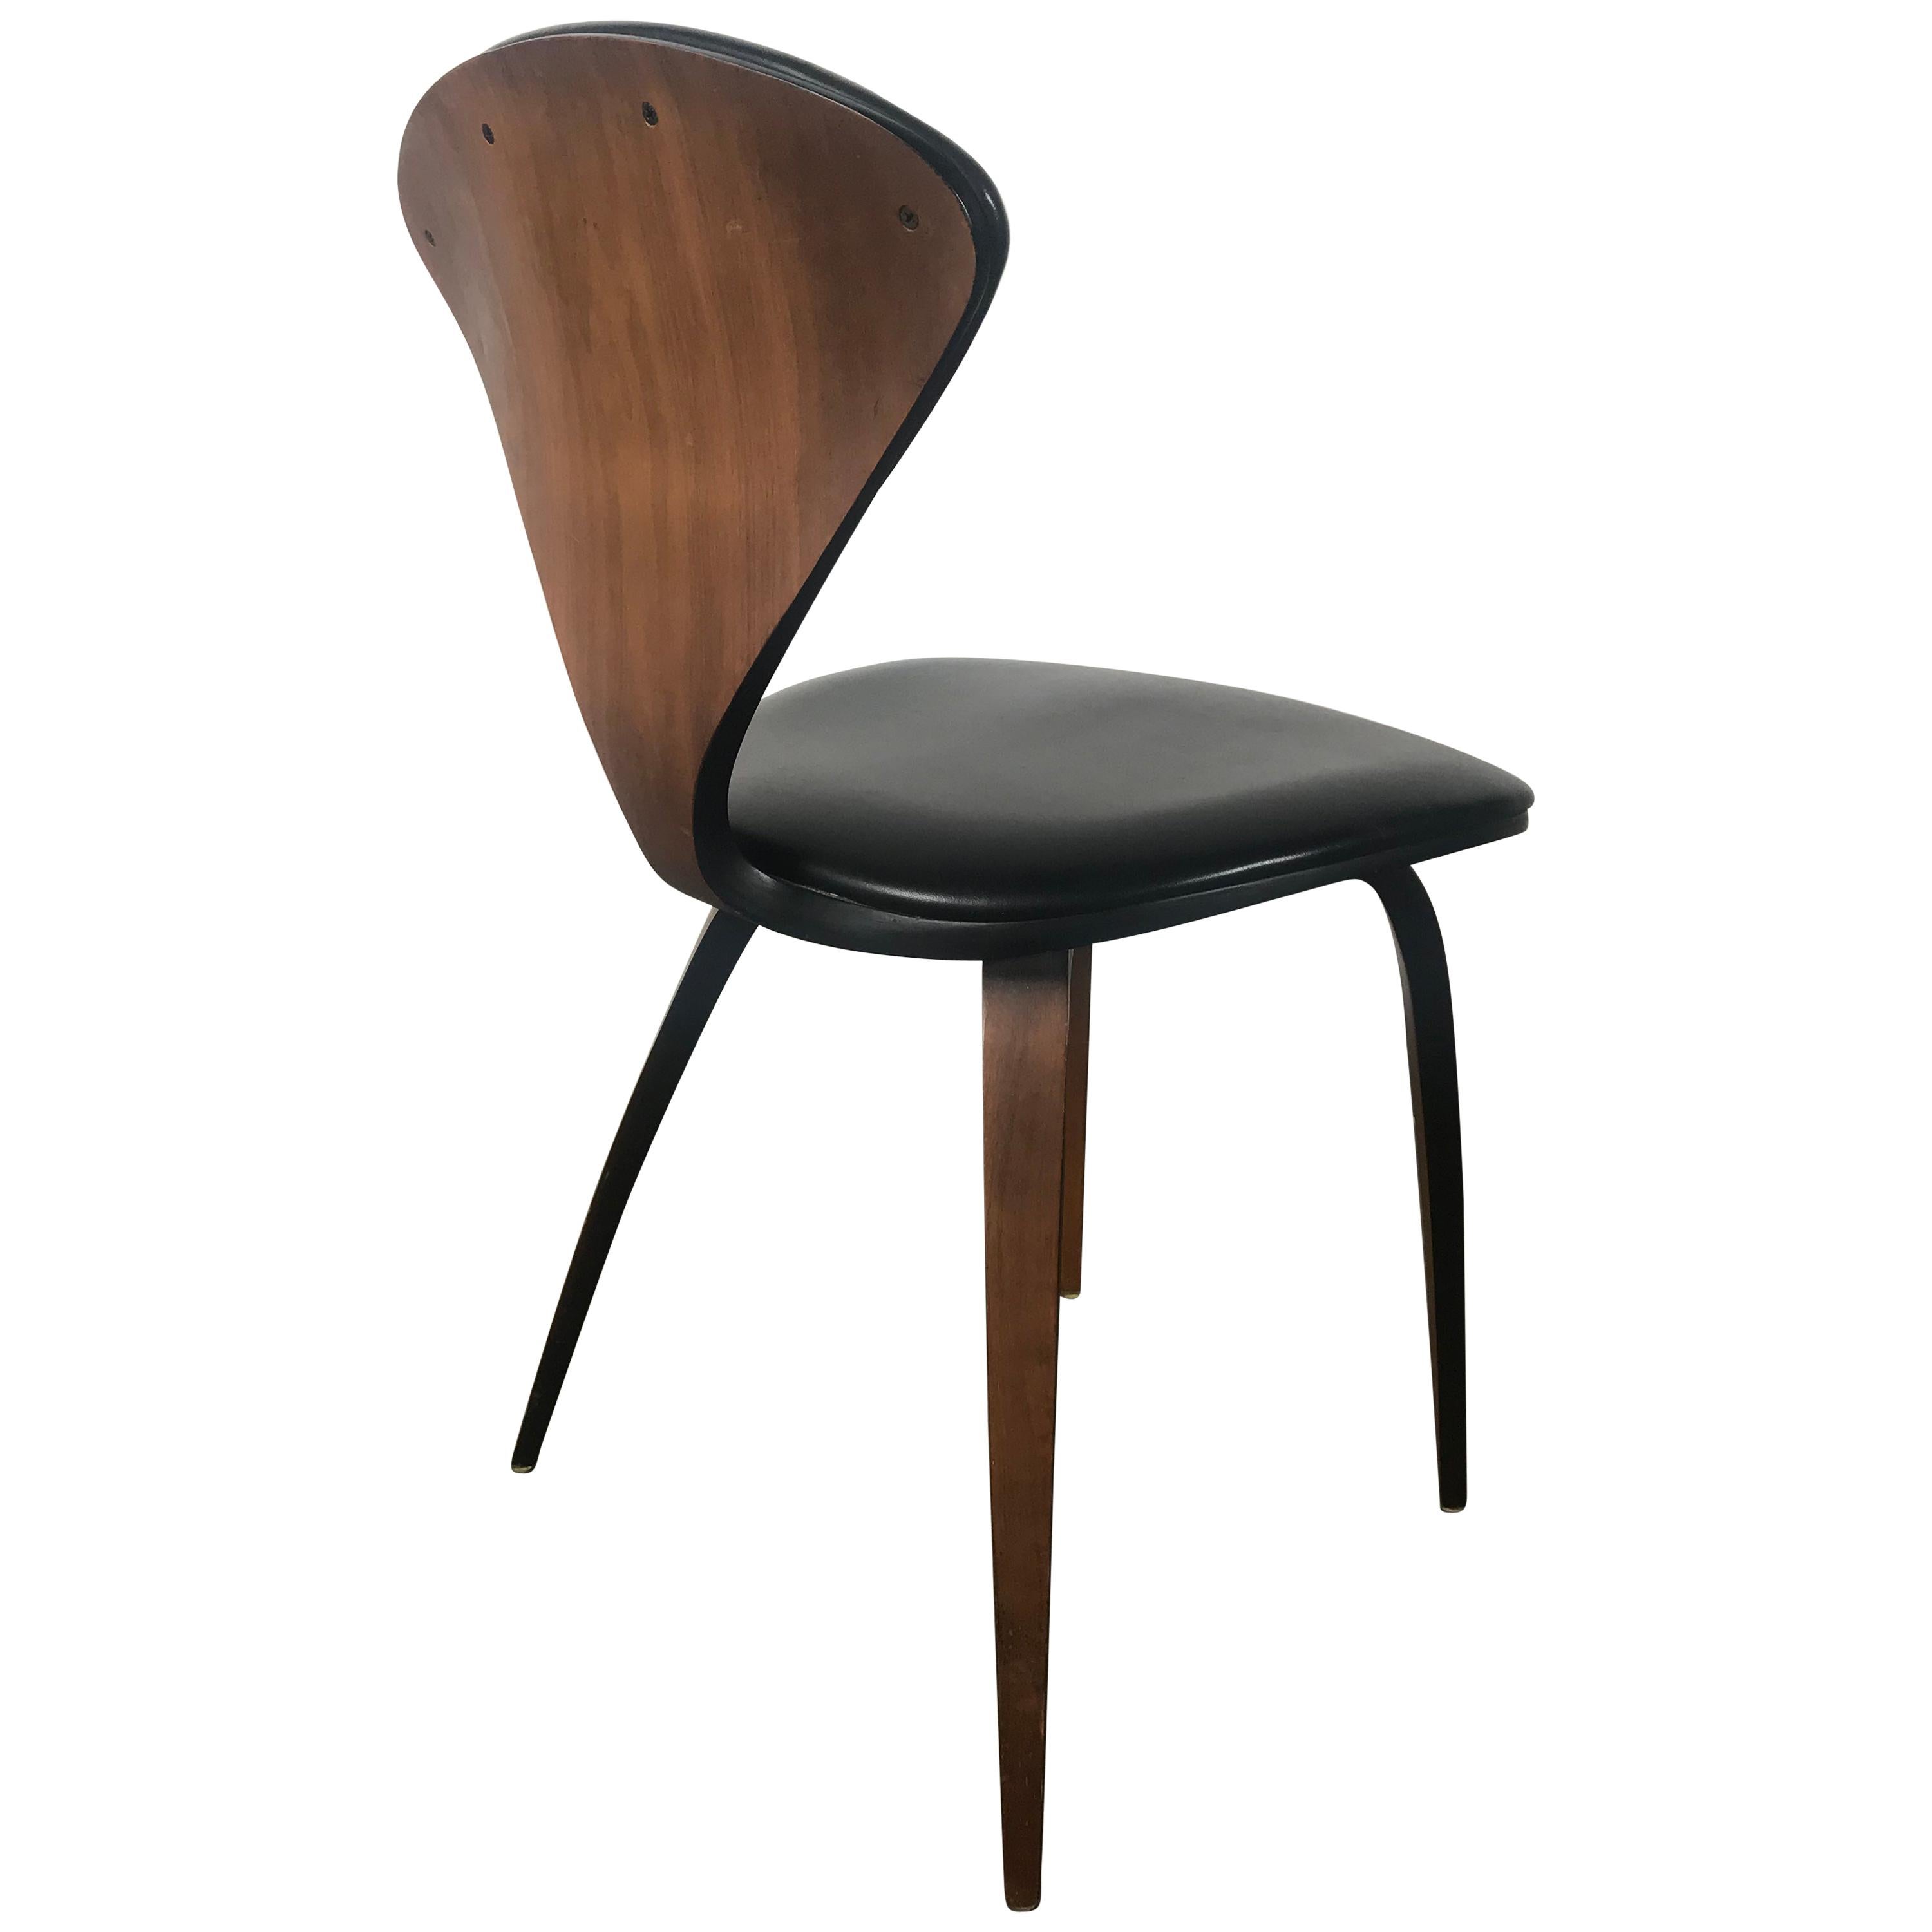 Classic Mid-Century Modern Plywood Side Chair by Norman Cherner for Plycraft